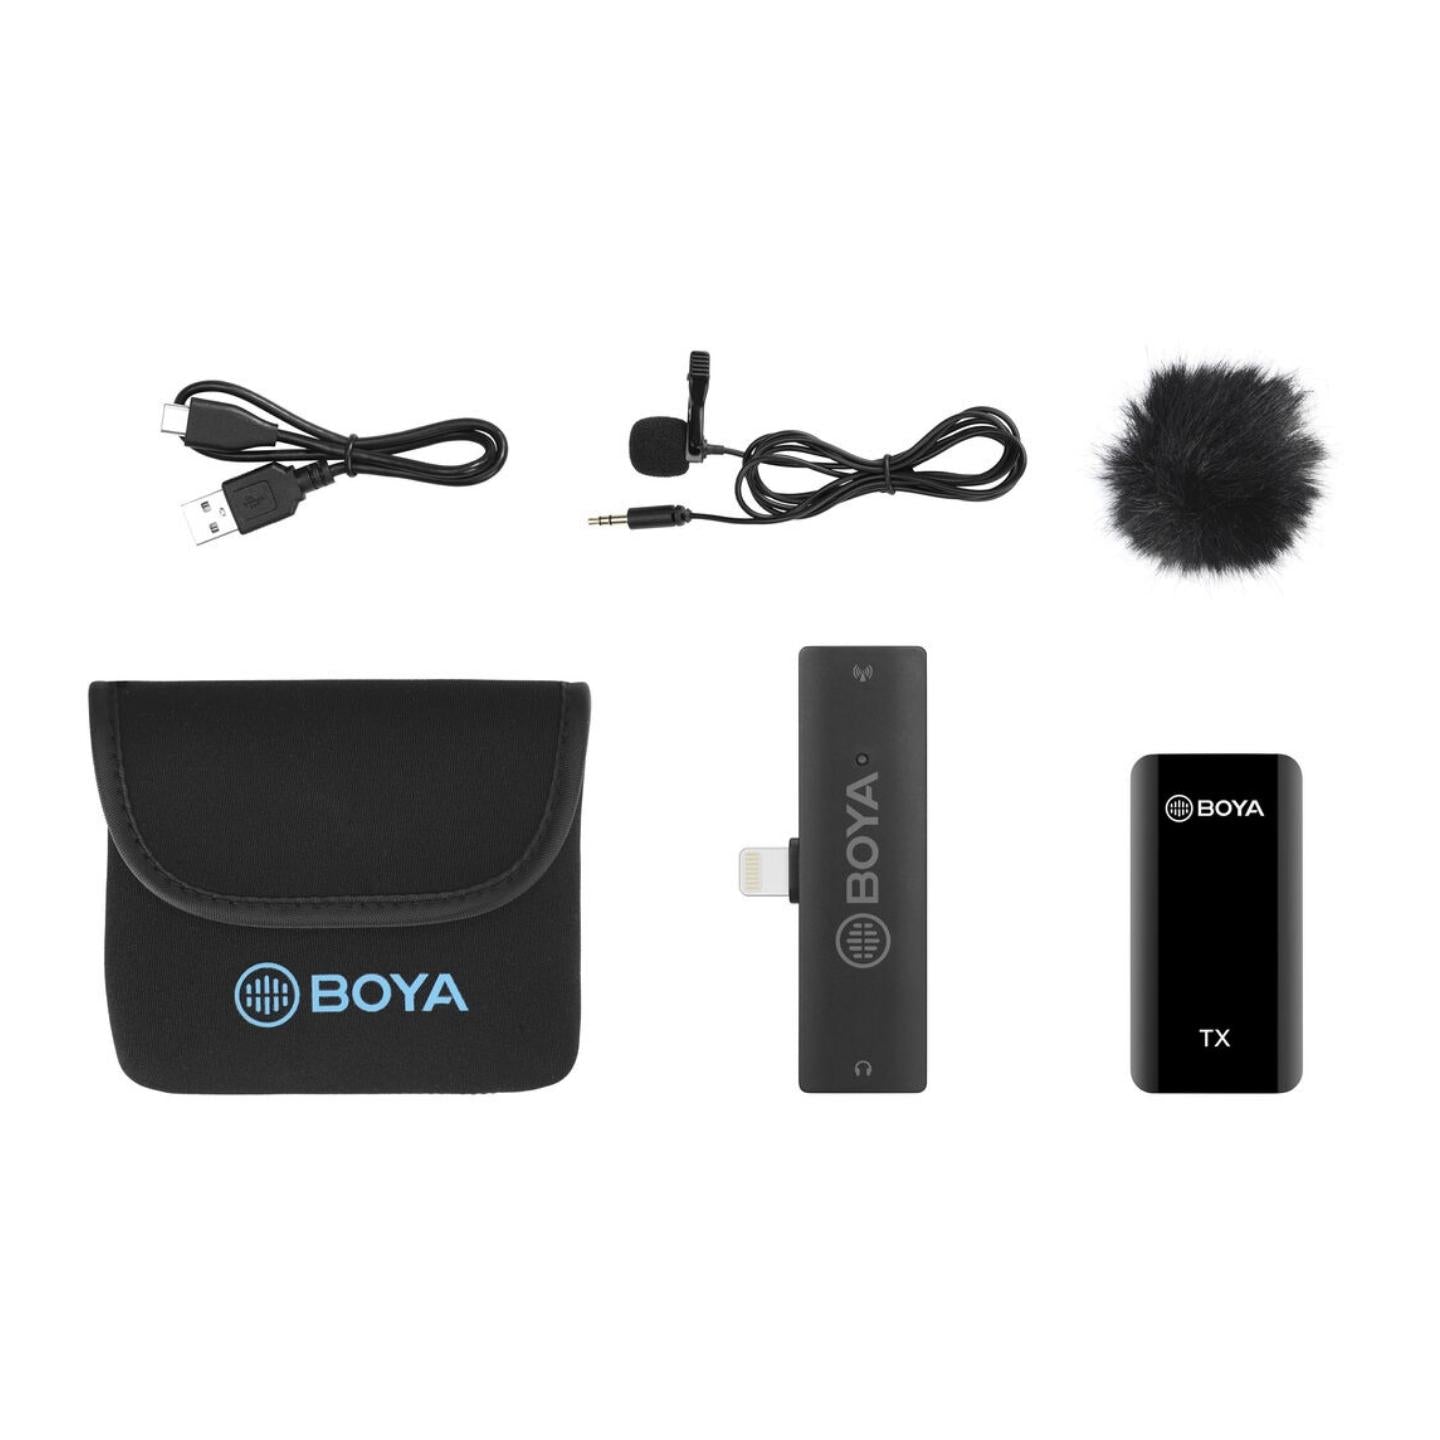 Boya BY-XM6 2.4 GHz Dual Channel Wireless Omnidirectional Microphone System with Lightning Connector, 100m Range Operation, OLED Screen | S3, S4